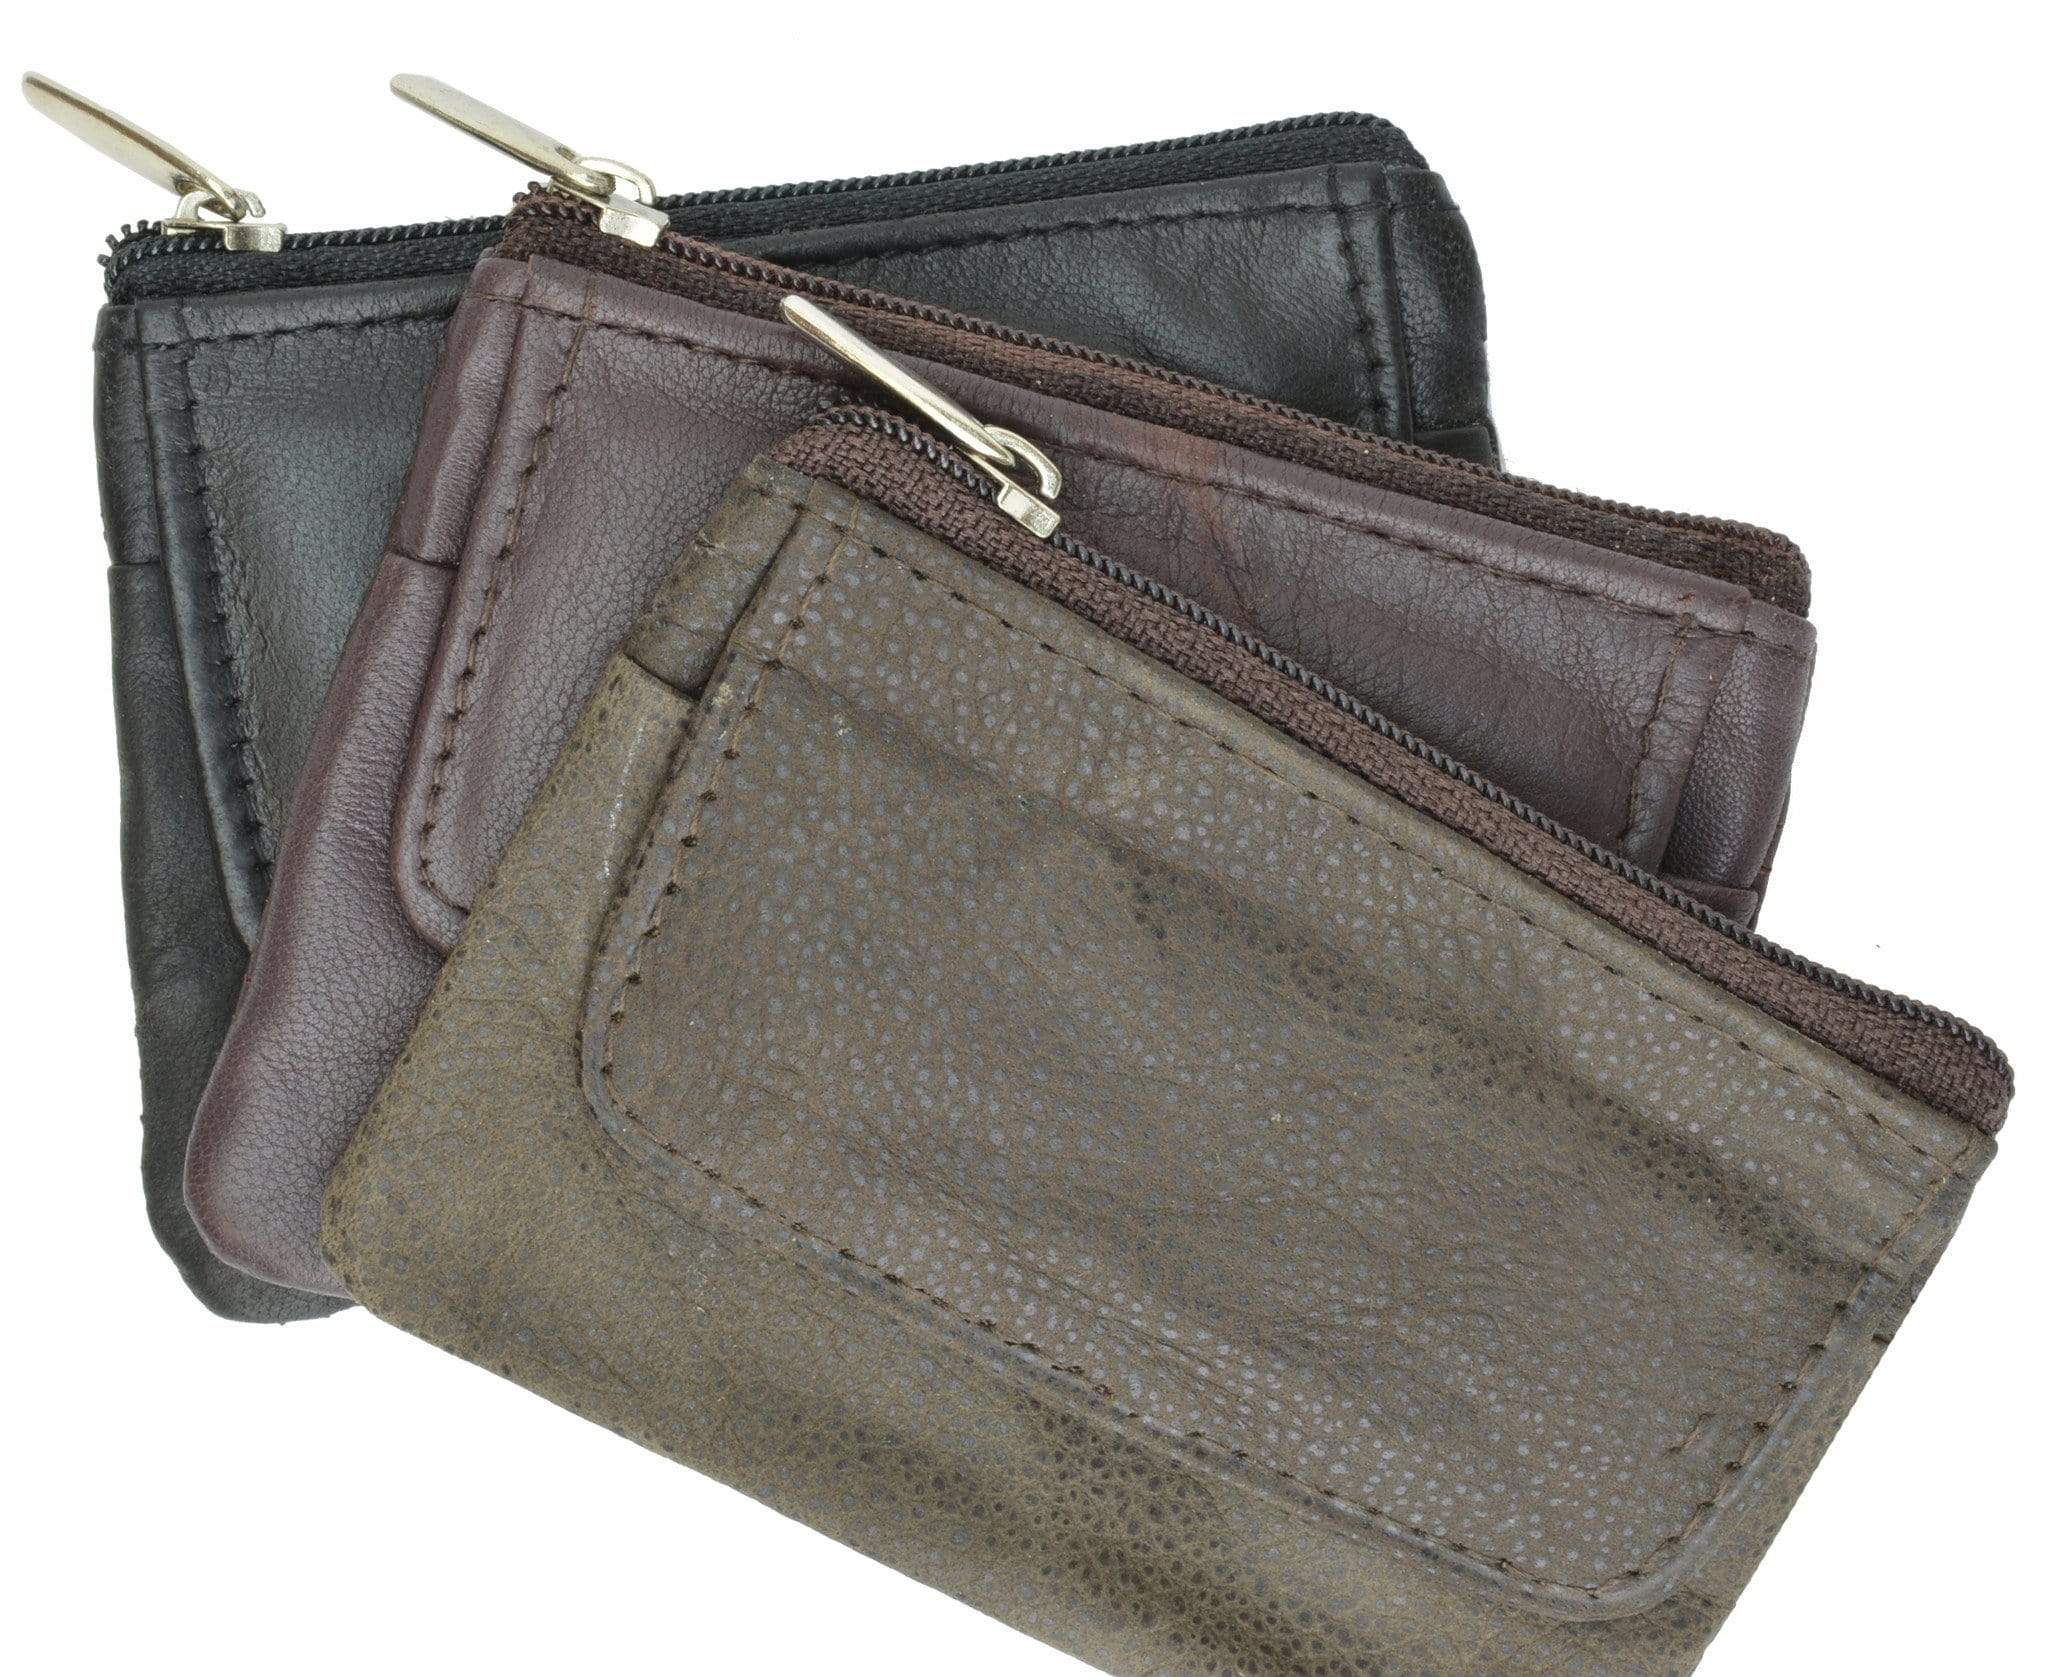 KISSLOCK Leather Change Purse with Clasp and zipper bottom pouch –  Improving Lifestyles